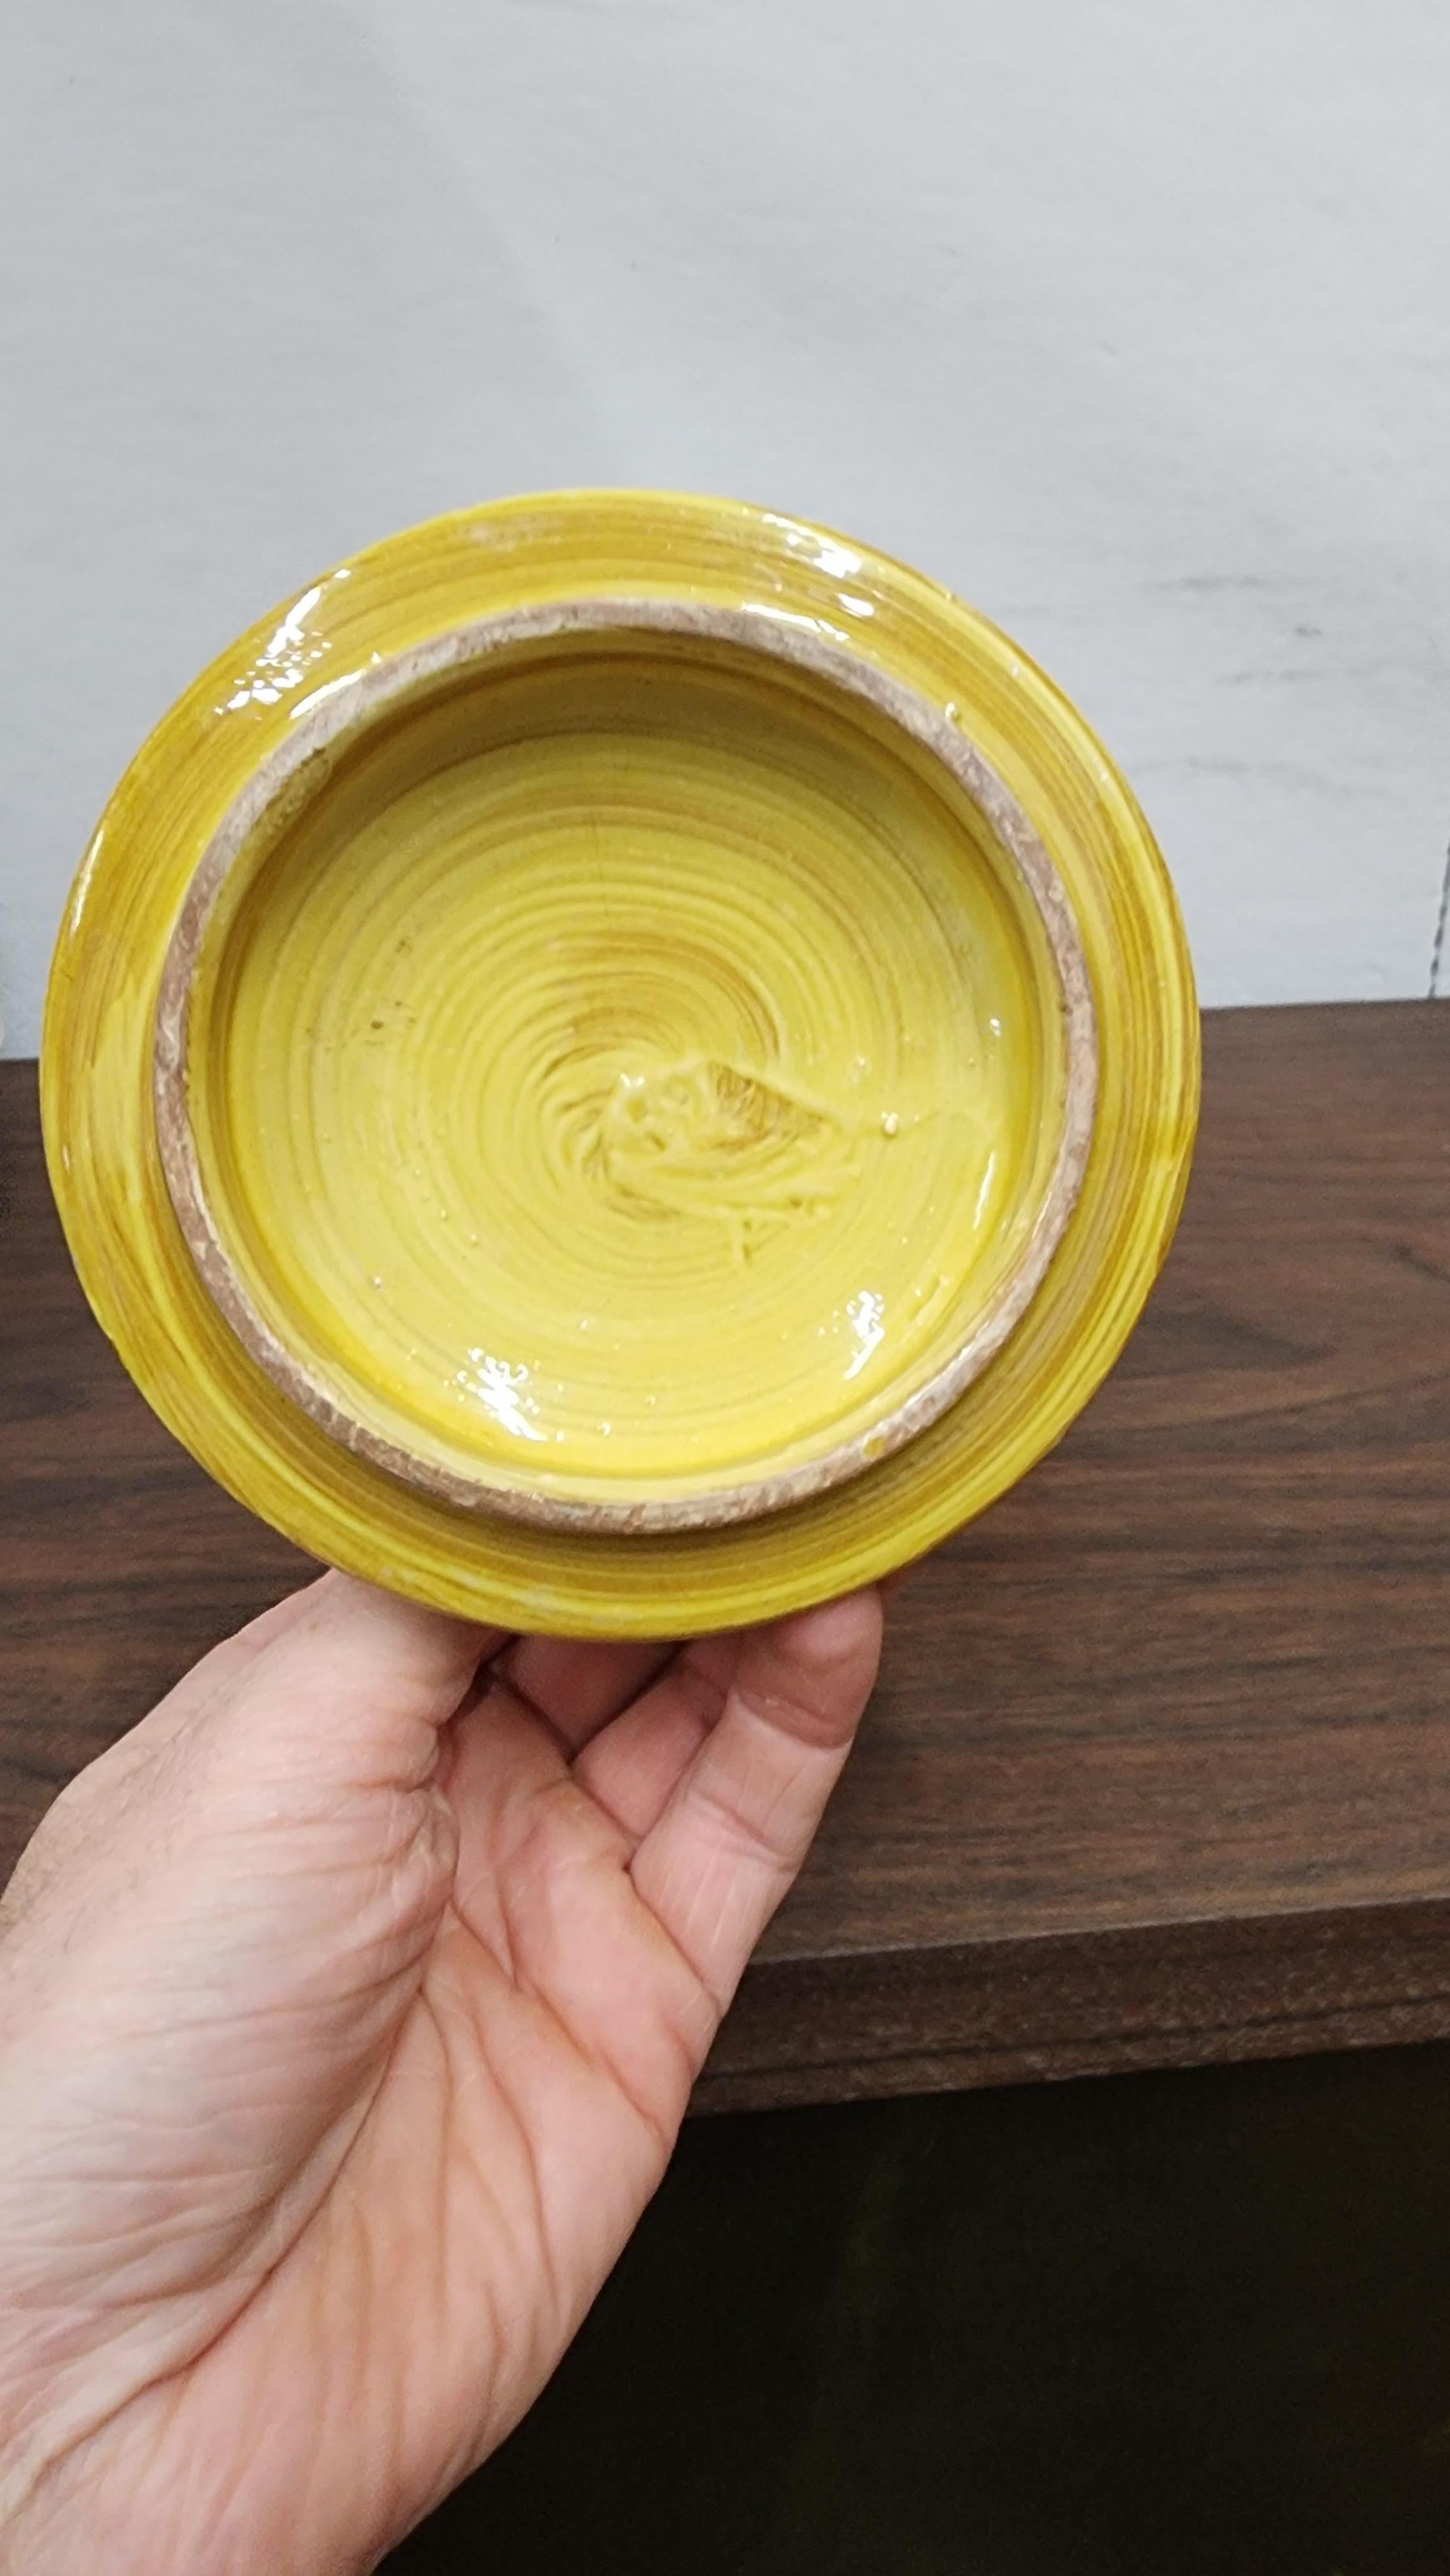 Awesome yellow floral decor lidded catchall bowl by Aldo londi for bitossi. the lid functions as a candle holder. signed in underside